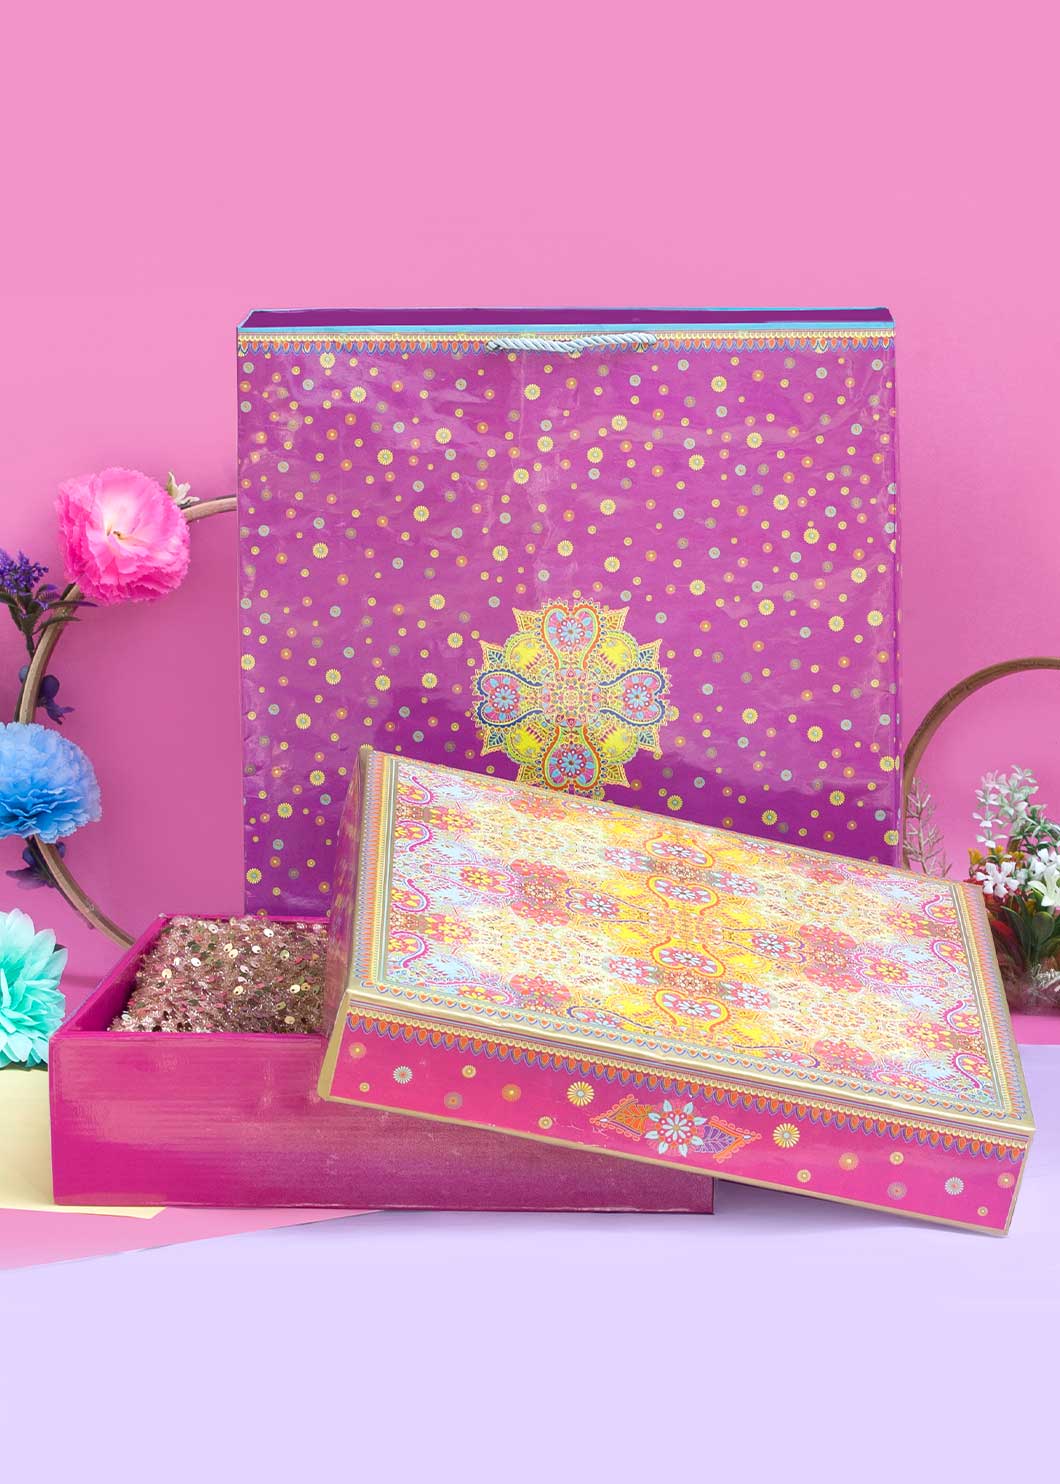 Multi Pattern Ornamental Floral Design Box for Packing - Cloth Packaging Box - Square Yellow Box